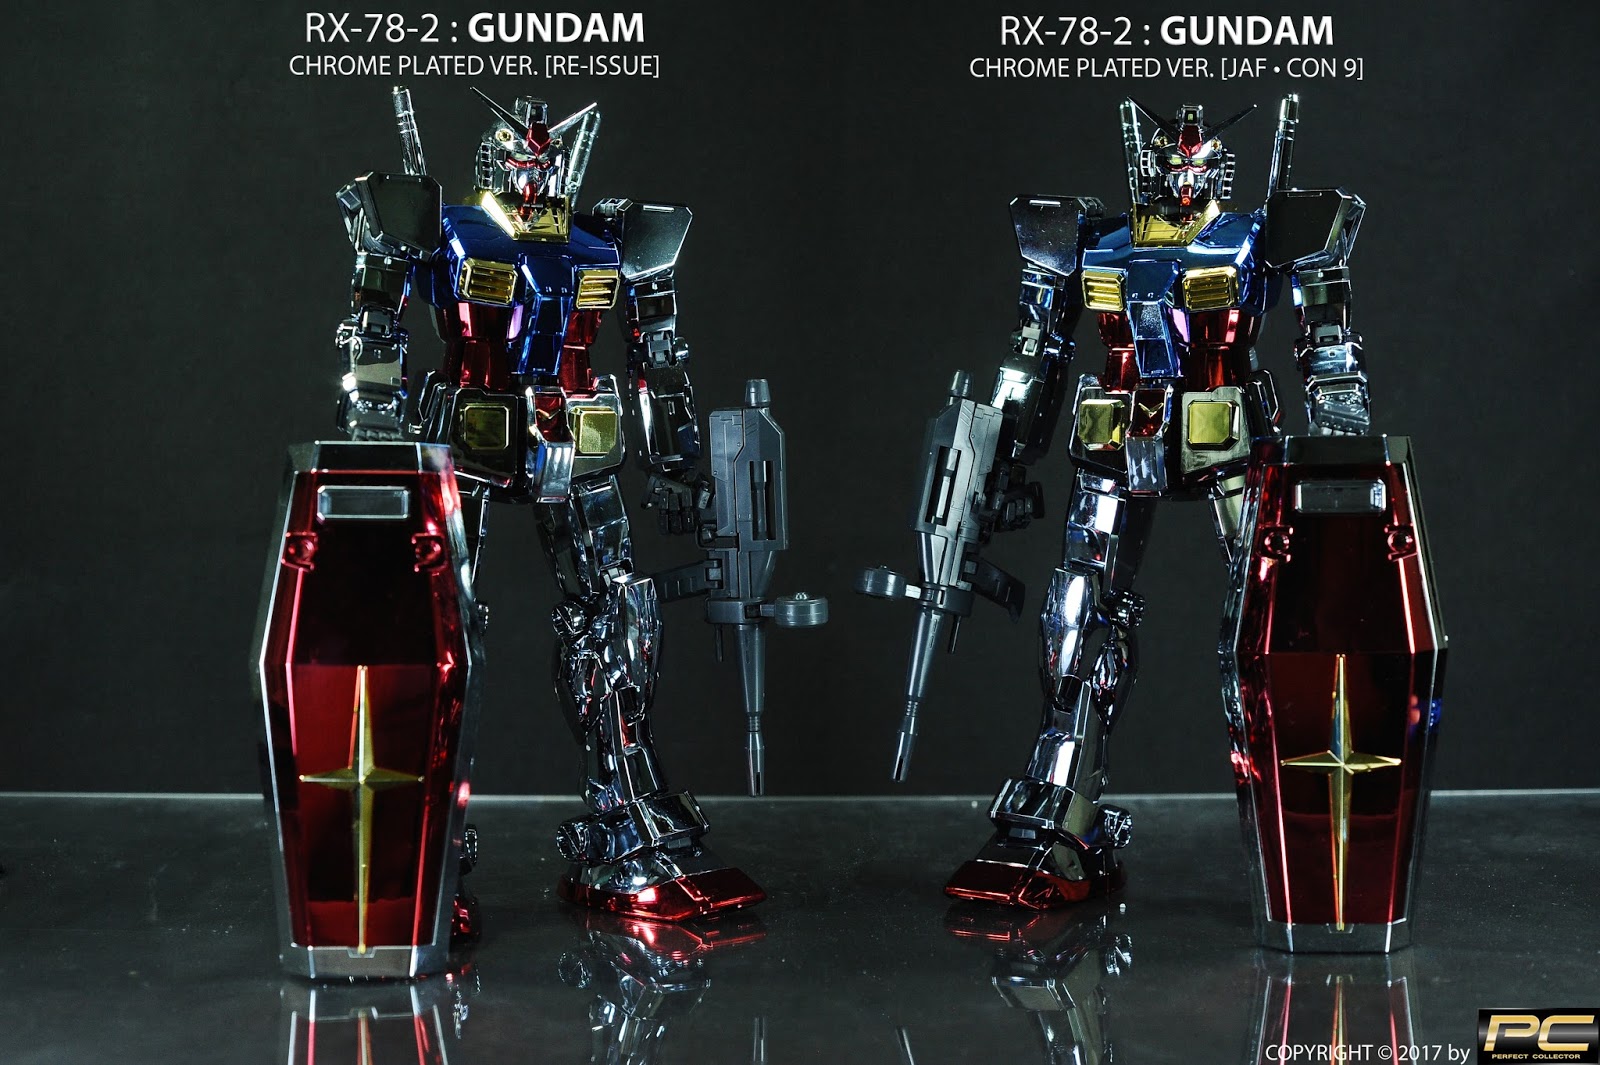 G リミテッド Gallery Pg 1 60 Rx 78 2 Gundam Full Color Plated Version Mobile Suit Gundam Limited Edition Gundam Model Kits And Figures